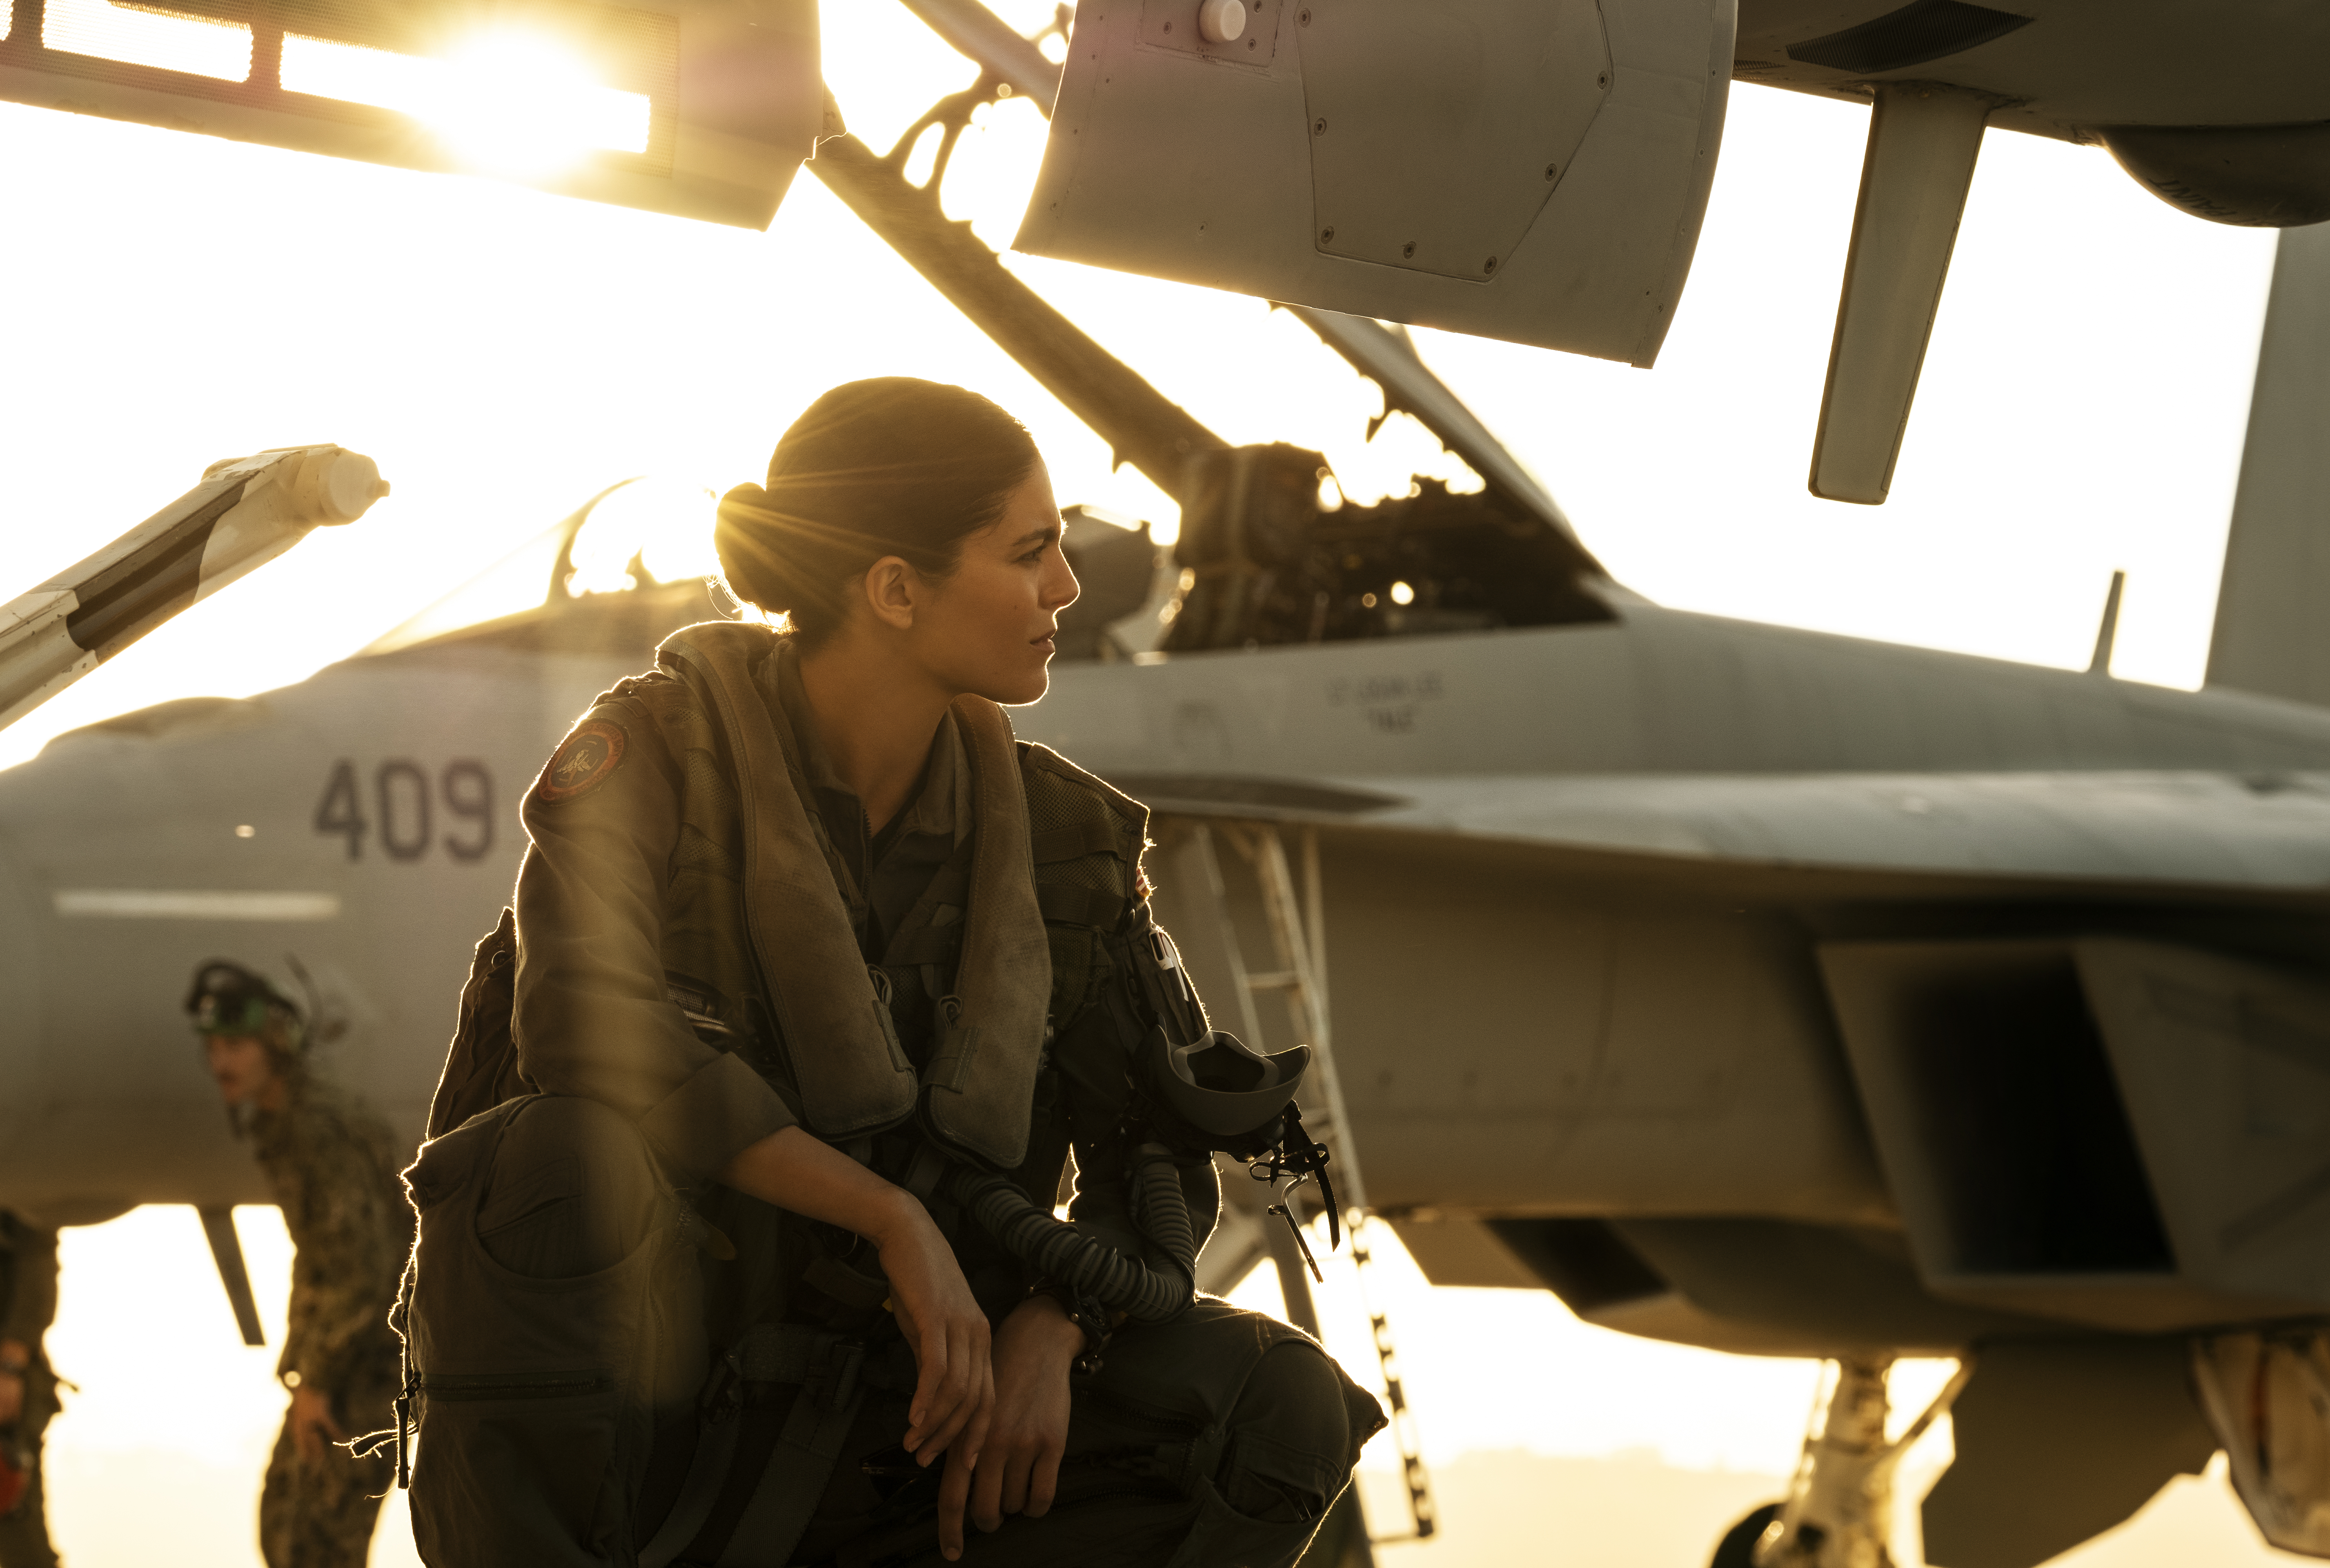 Monica Barbaro plays "Phoenix" in Top Gun: Maverick from Paramount Pictures, Skydance and Jerry Bruckheimer Films.